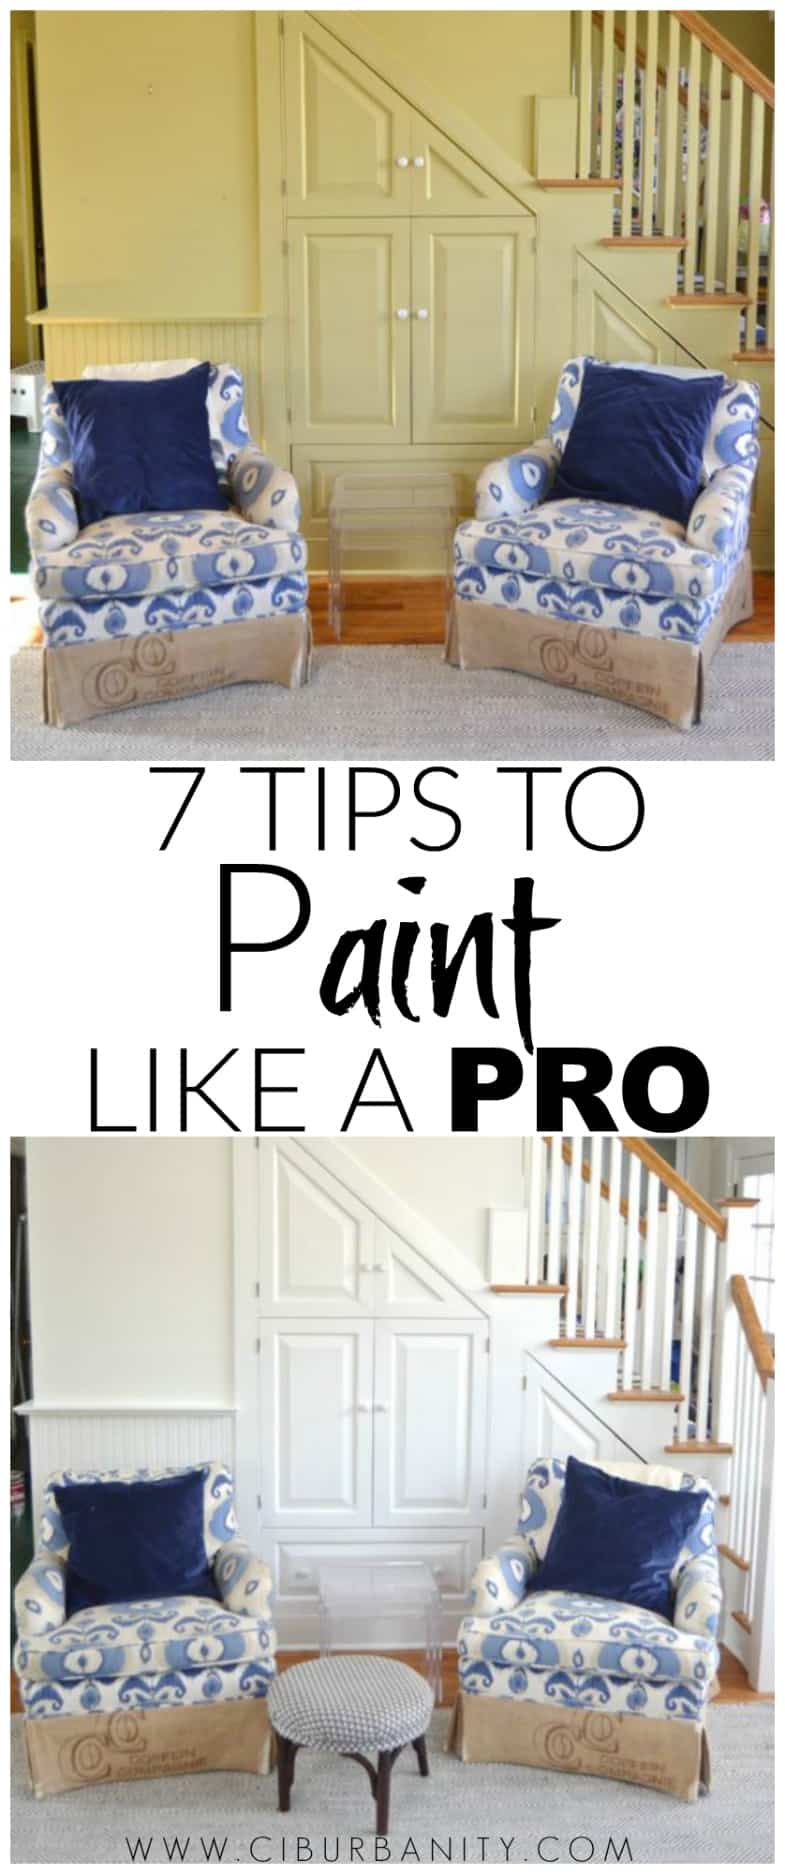 7 tips to paint like a pro